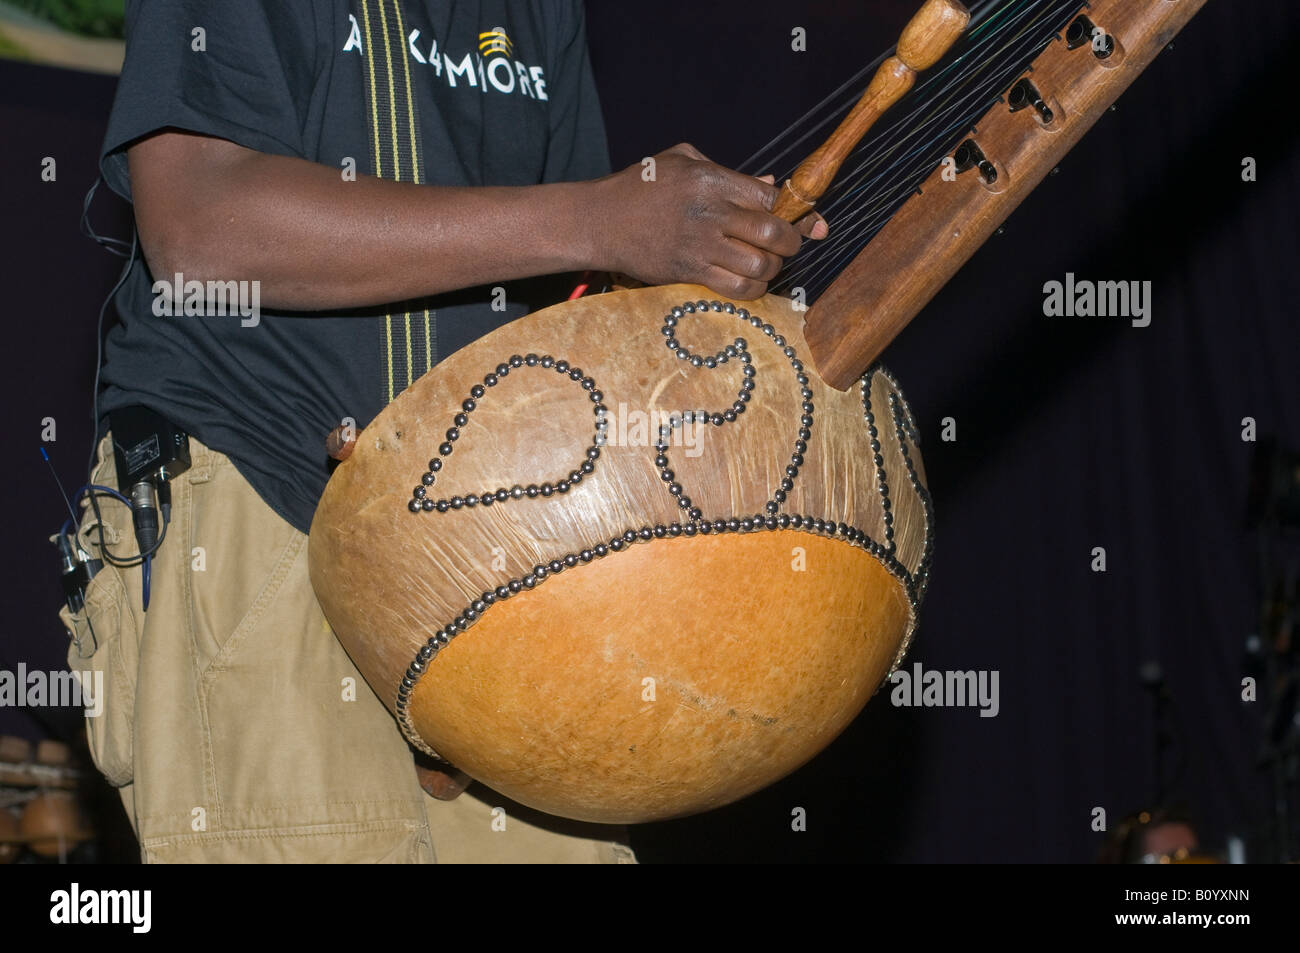 Kora detail showing strings and hand position This instrument is being held by N Faly Kouyate during a sound check Stock Photo